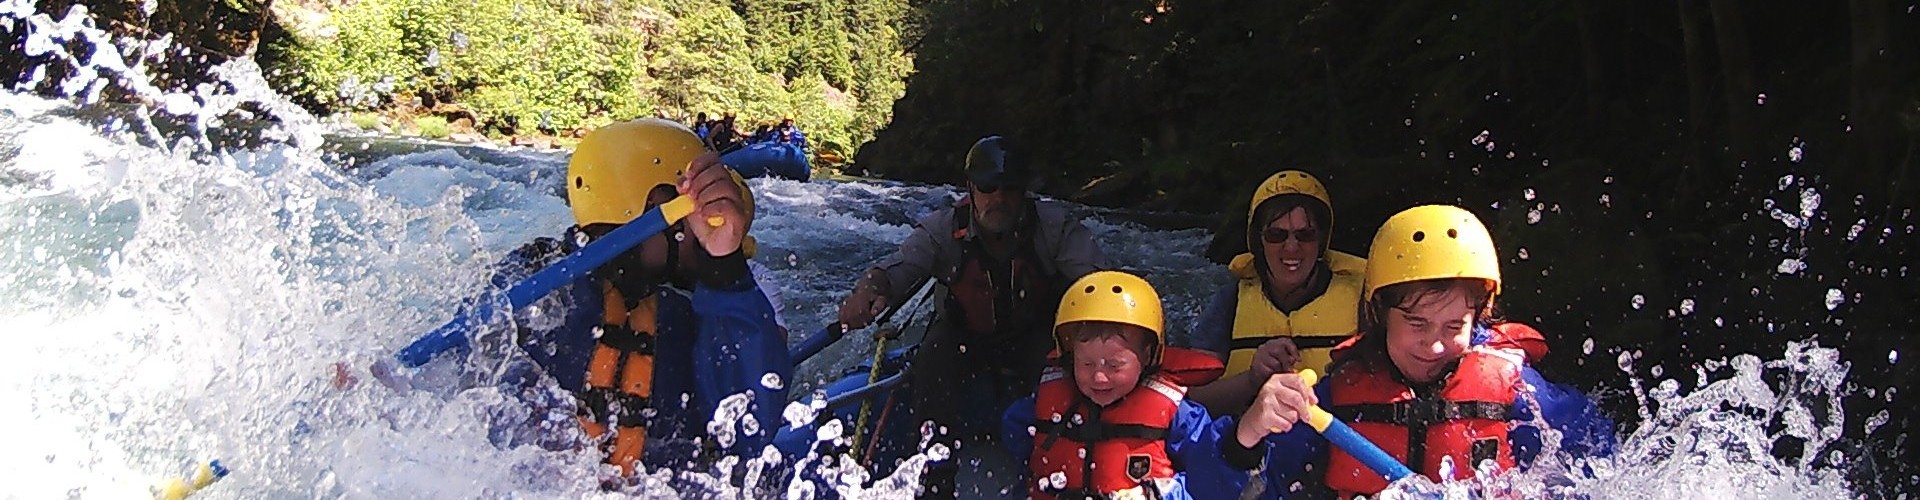 Family fun At North Umpqua Outfitters